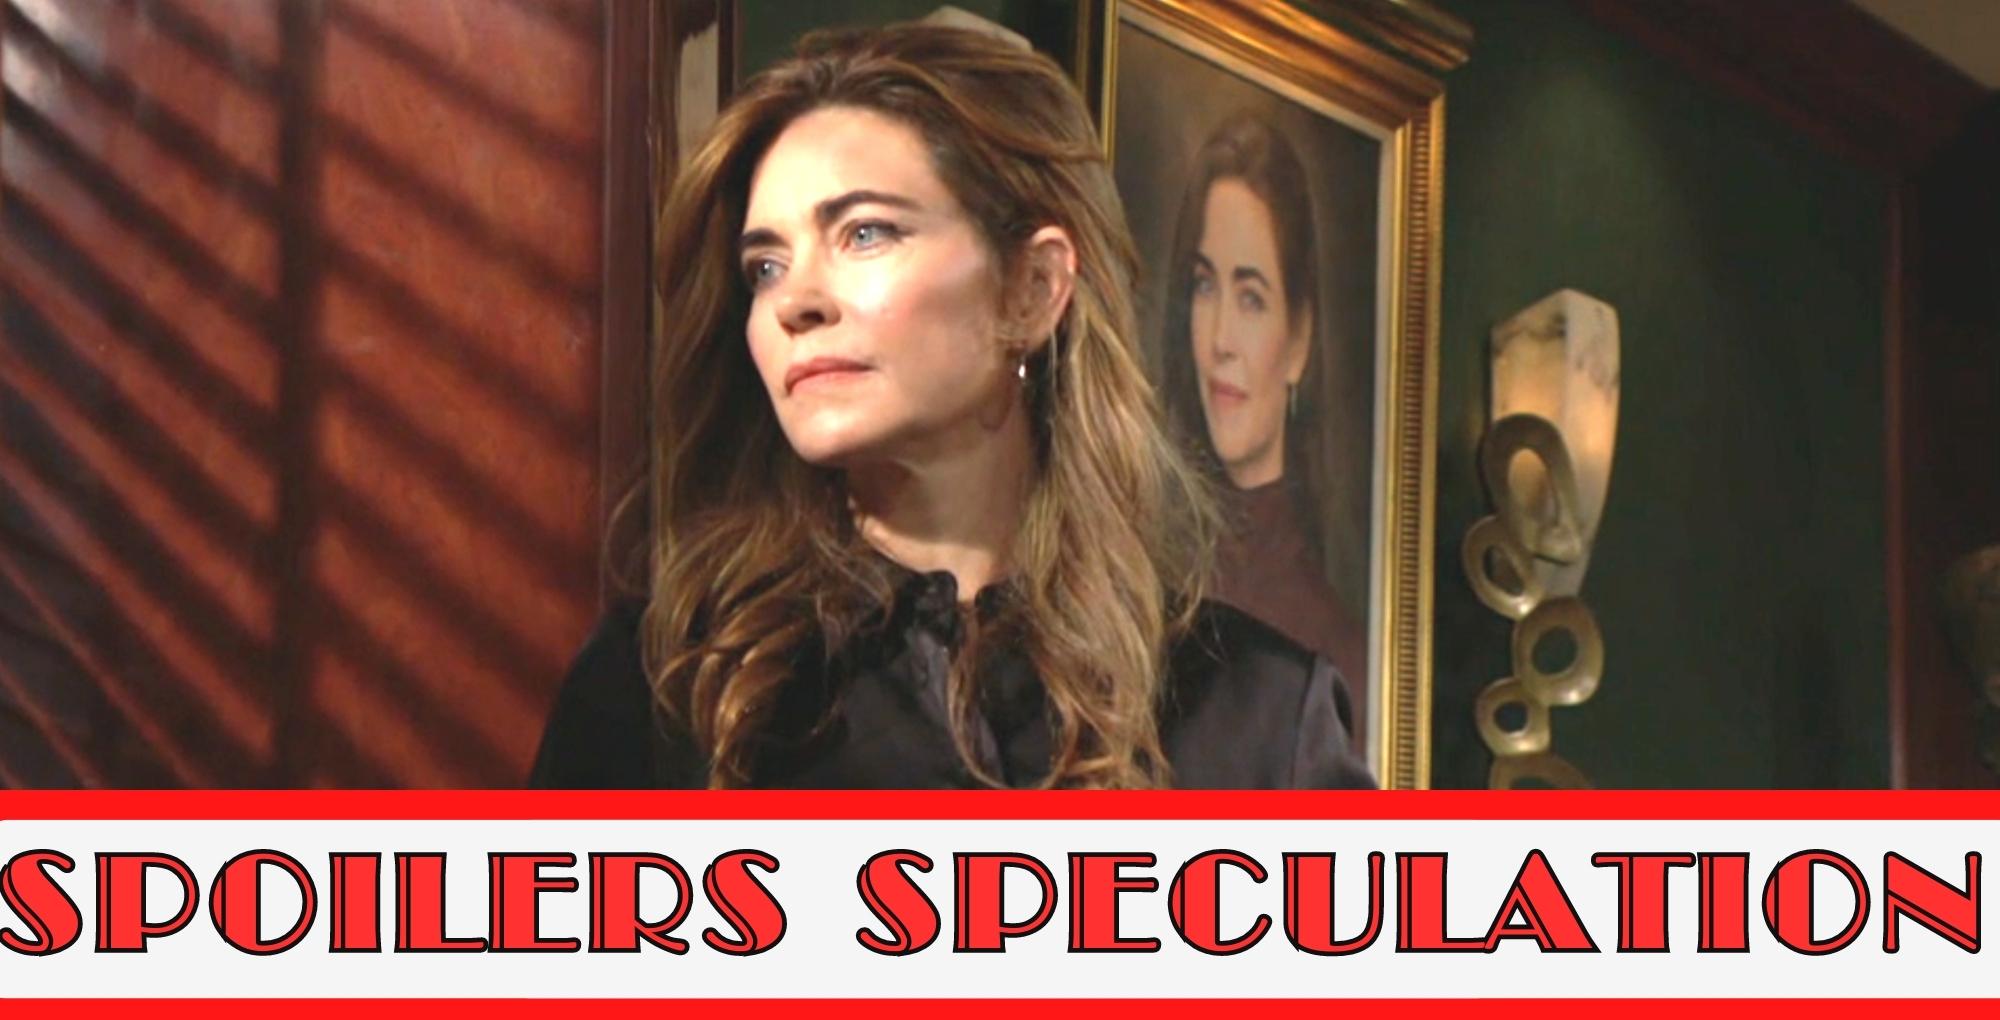 y&r spoilers speculate about victoria newman finding love.